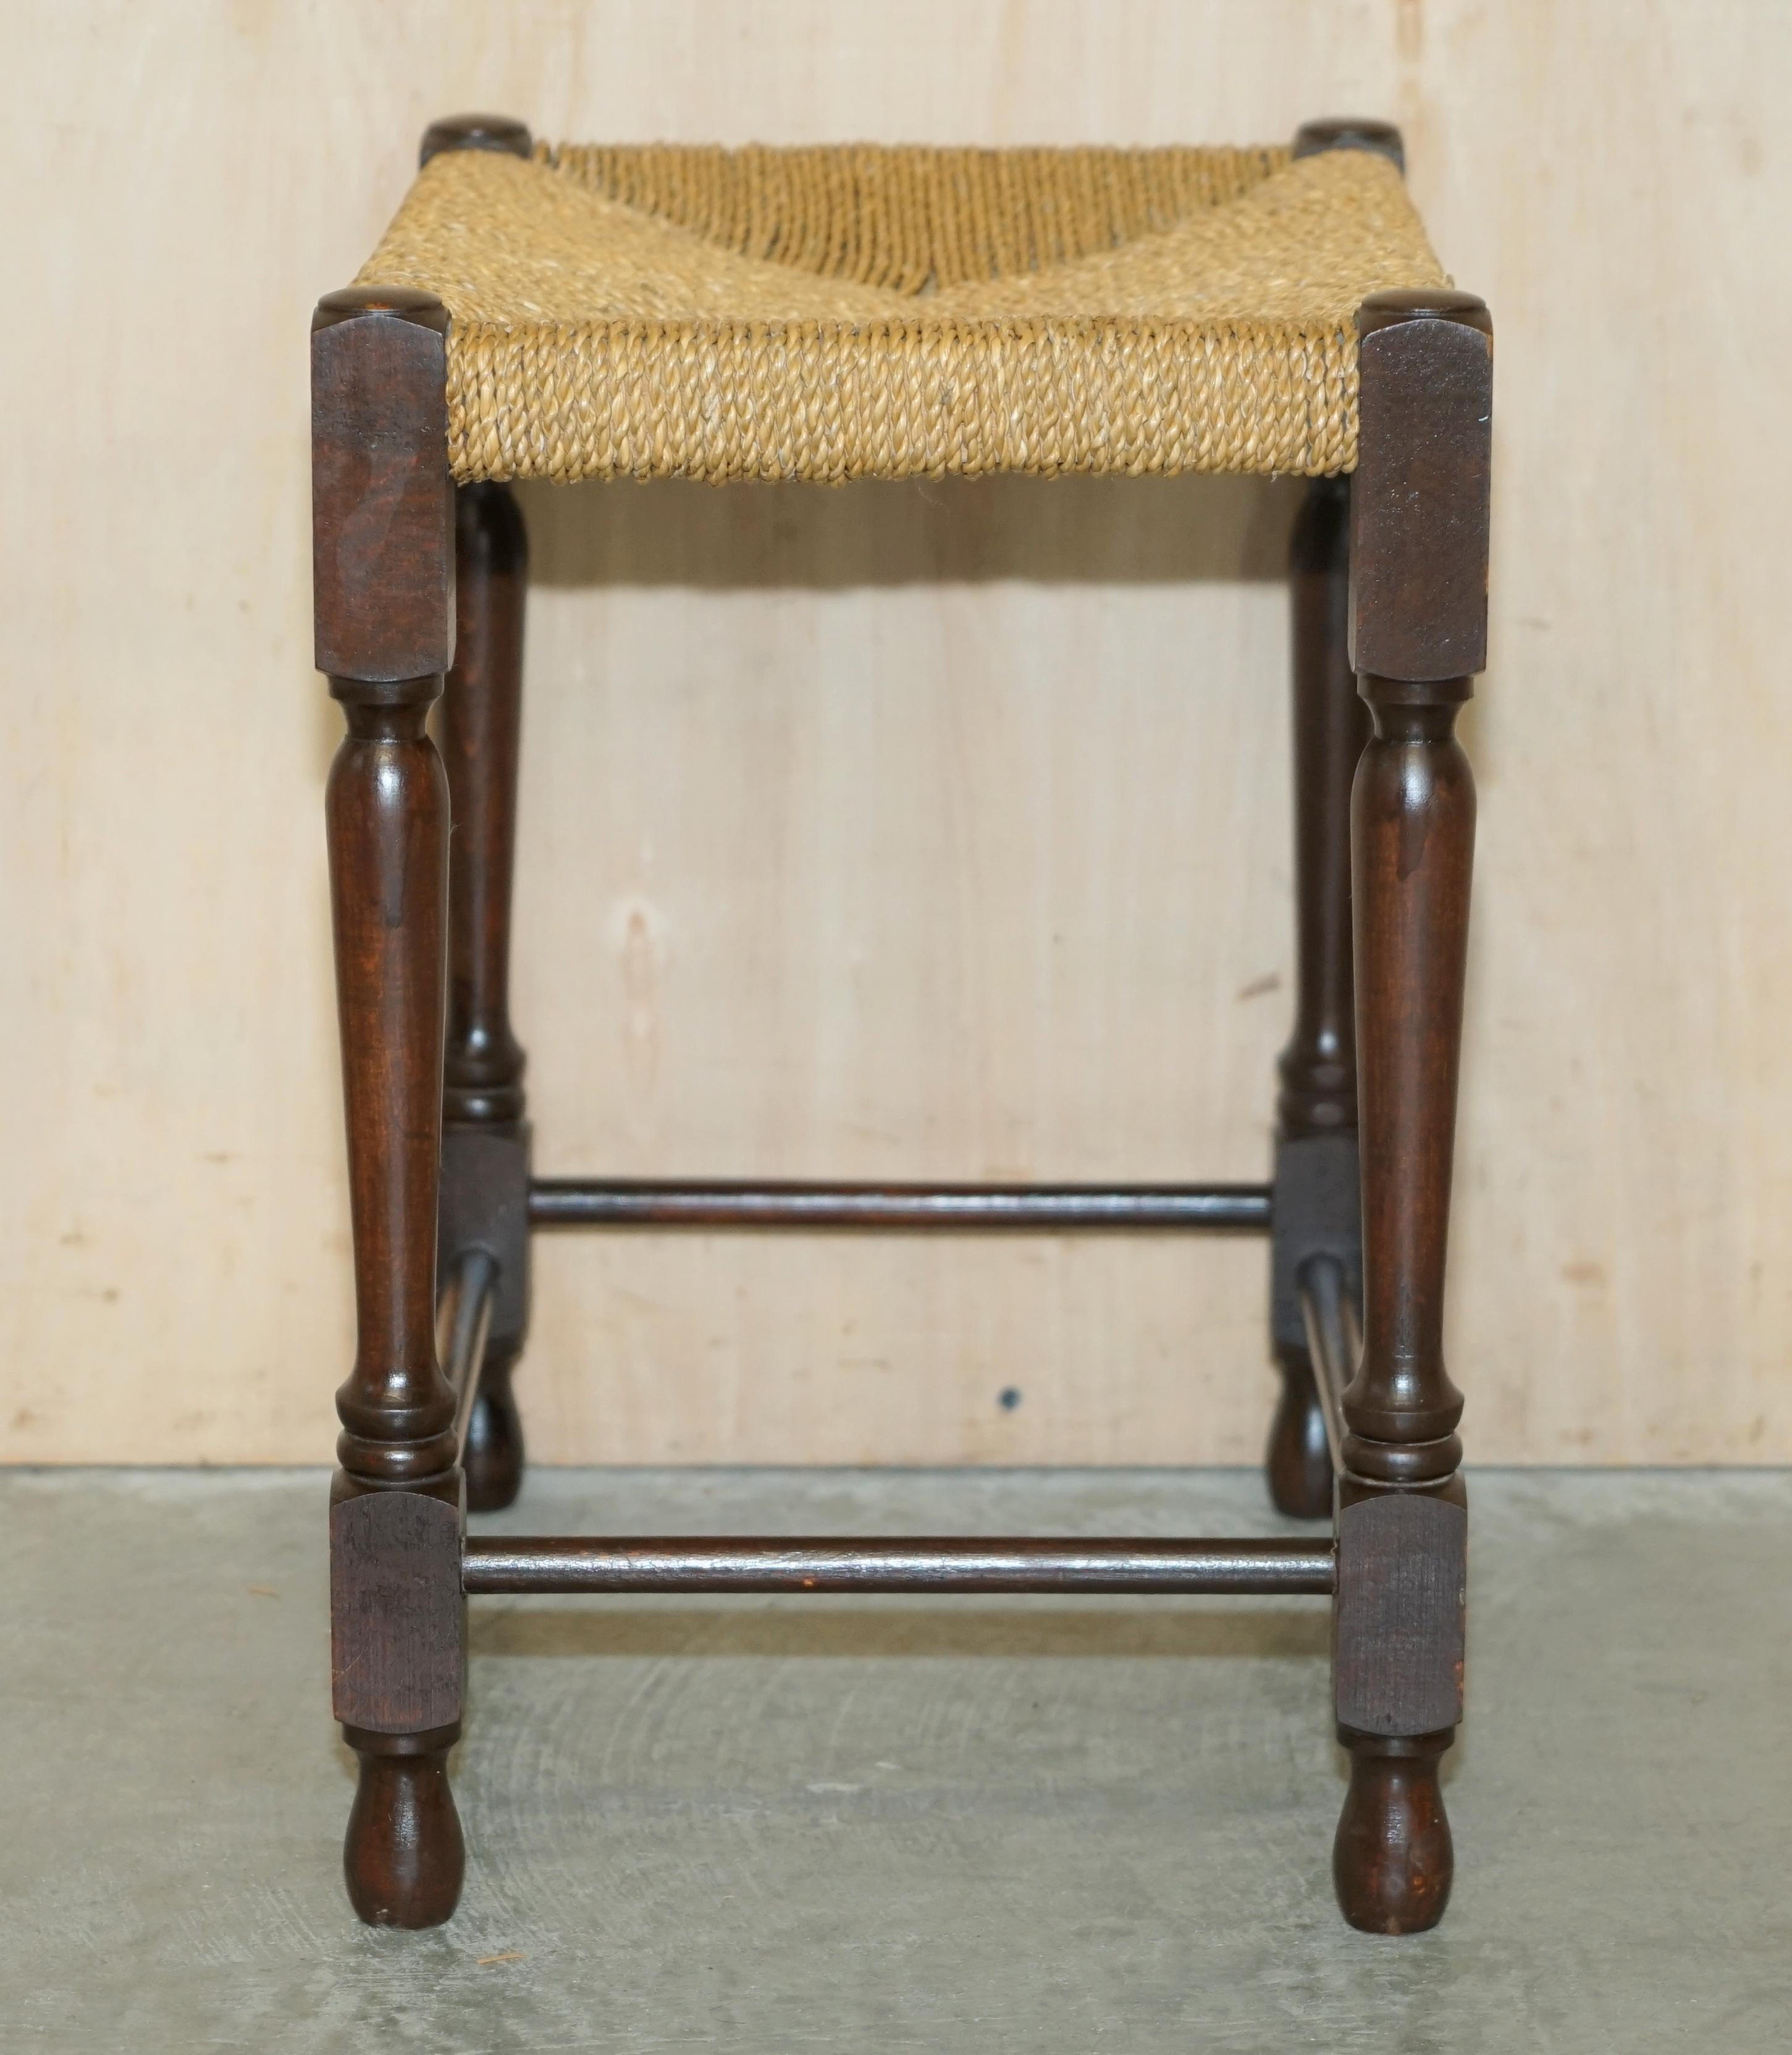 Vintage circa 1940s Dutch Bench Stool with Rope Woven Rush Style Seat For Sale 6